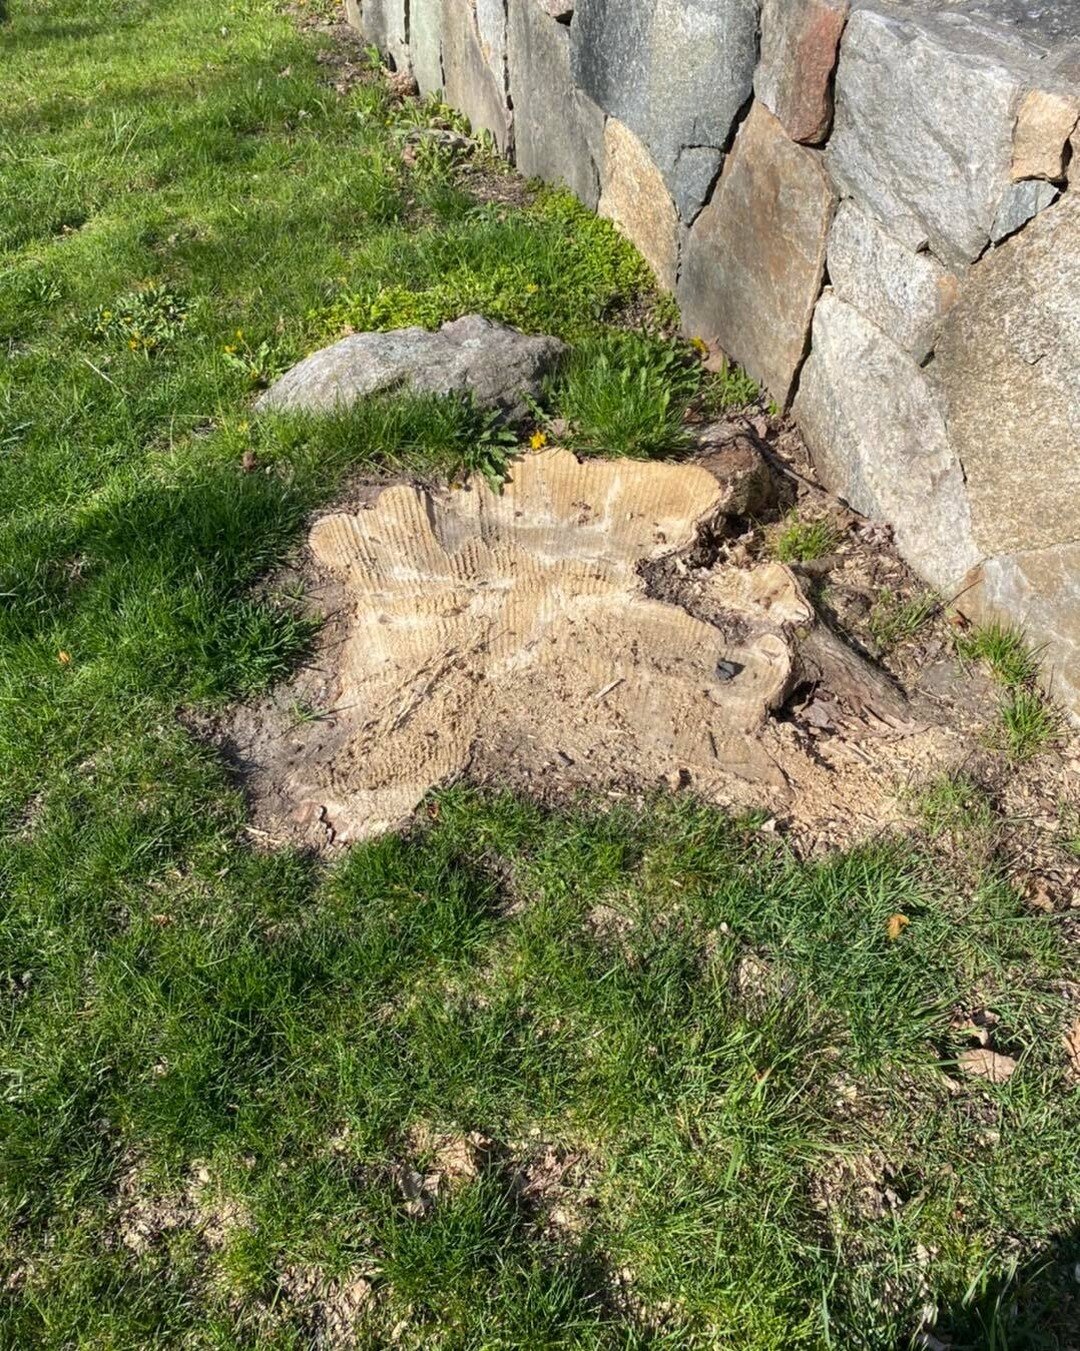 Stump grinding 101:
Grind stump fully, and BELOW the ground

Theirs (the wrong way) is on the left. Ours (the right way) is on the right. Which would you choose?

#womanownedbusiness #stumpgrinding #stumpremoval #stumpwork #stumpgrinding #stumpwork #